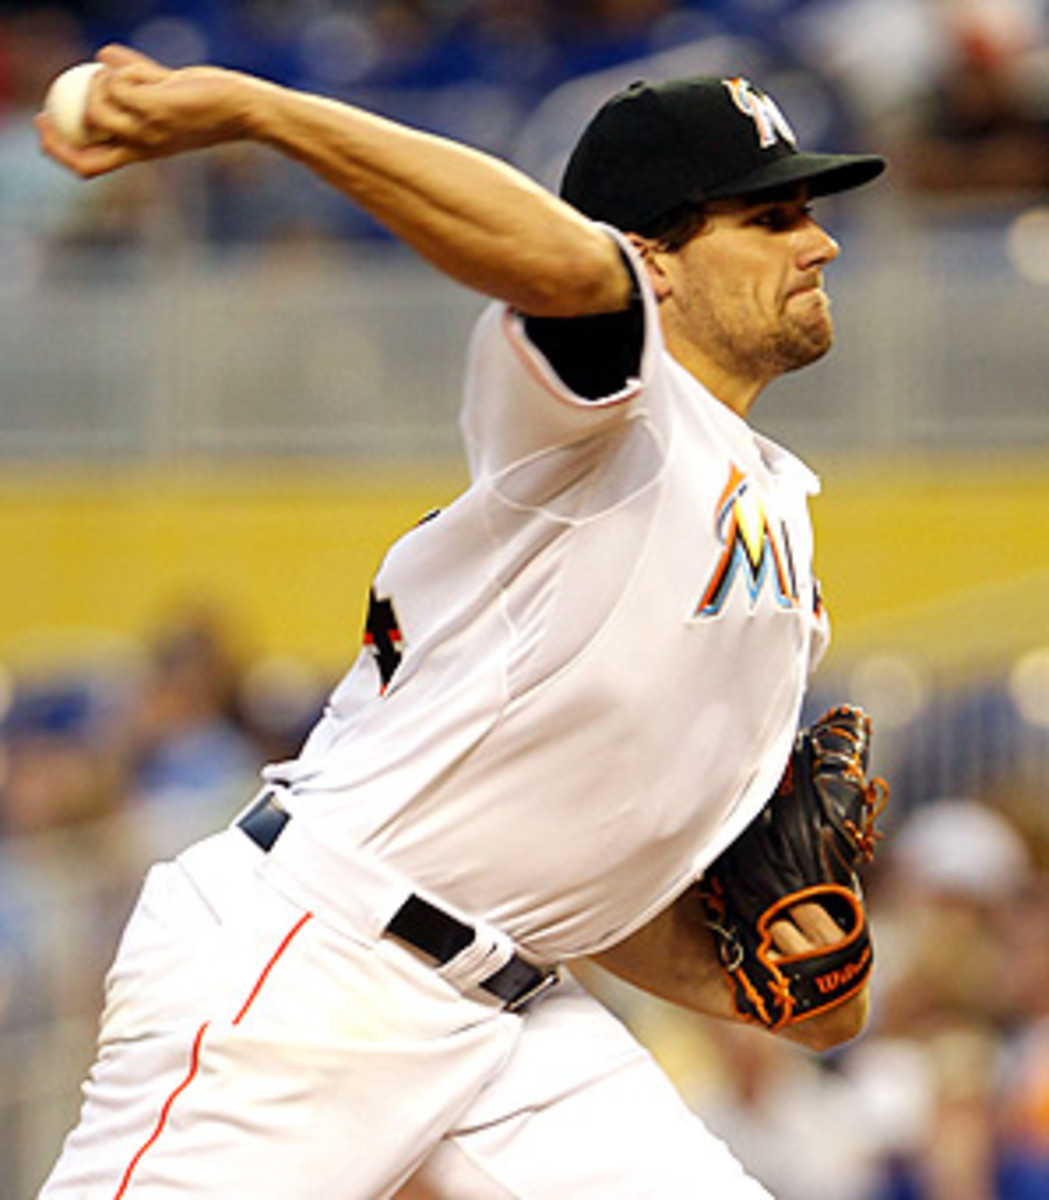 Against the Rockies, Nathan Eovaldi showed off his developed pitching repertoire.